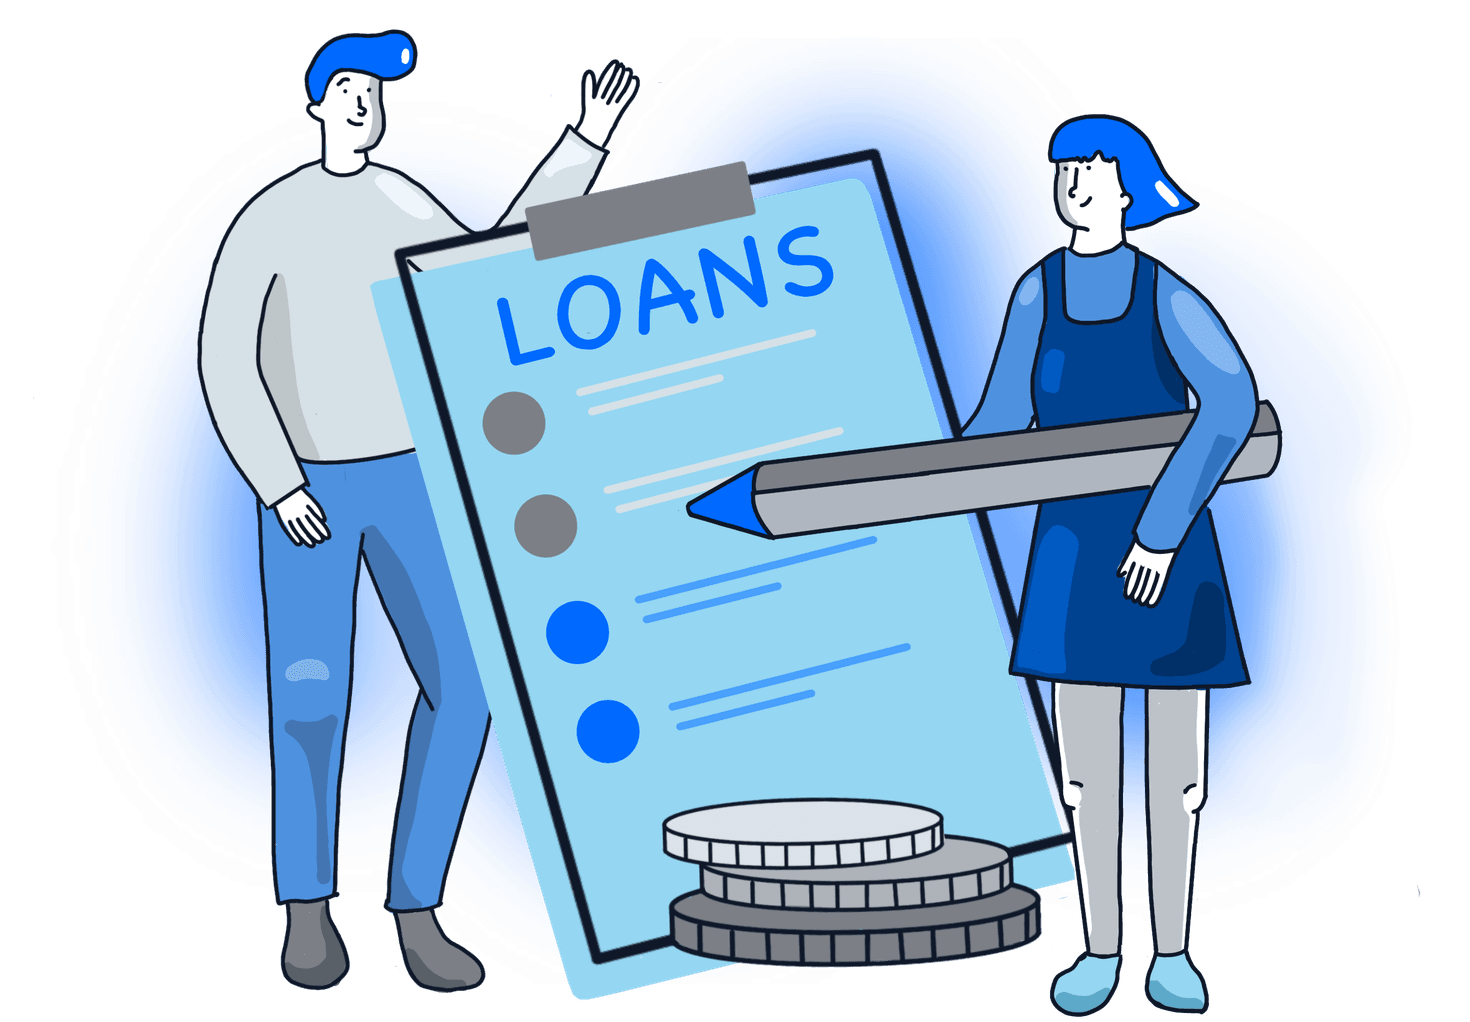 List of loans with bullet points